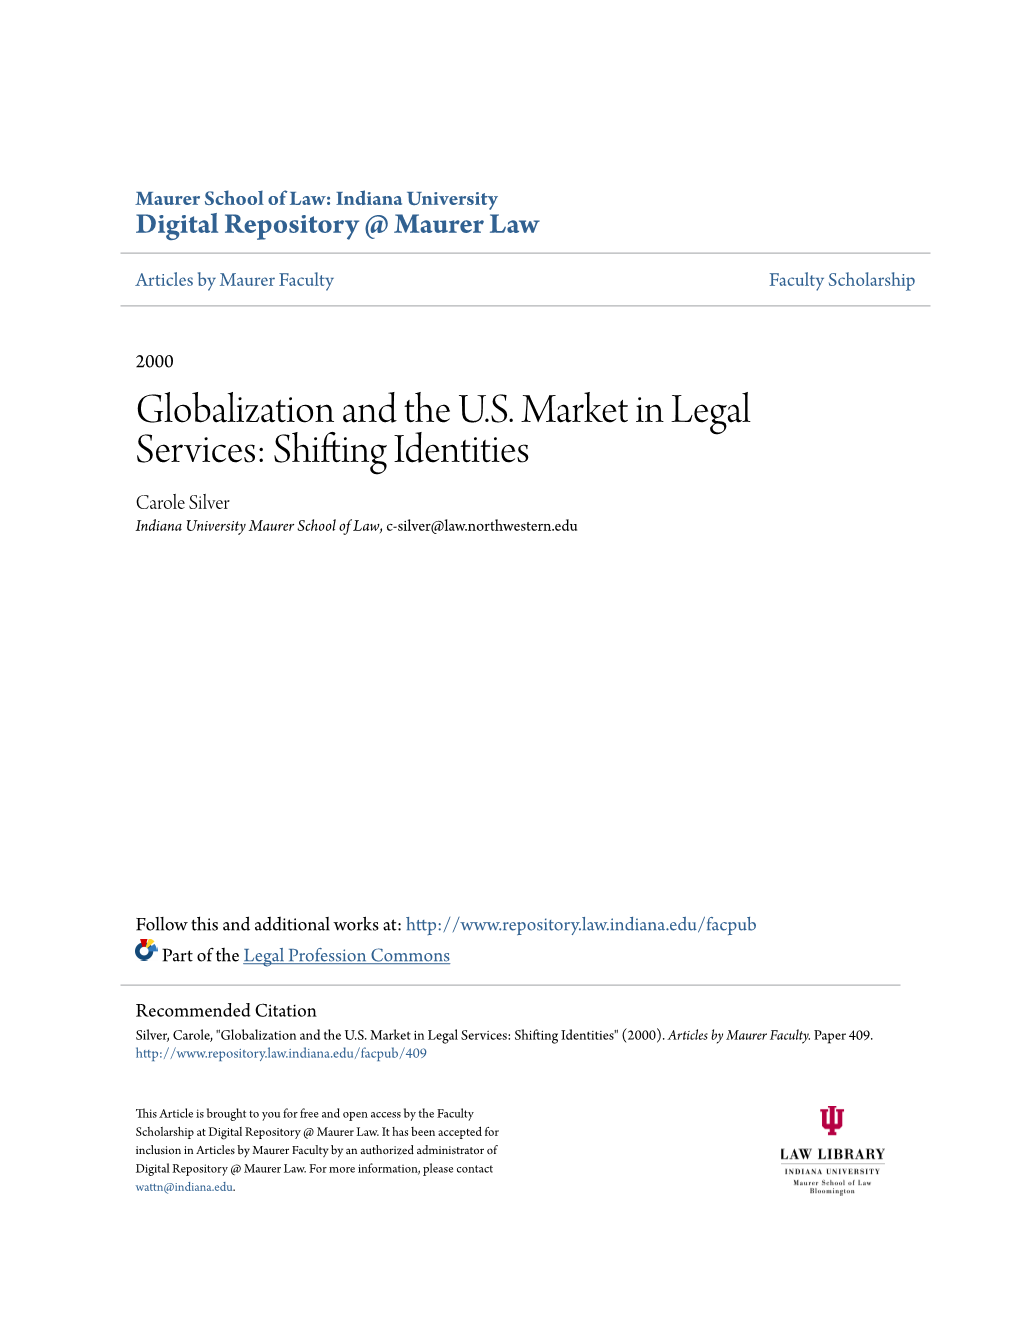 Globalization and the U.S. Market in Legal Services: Shifting Identities Carole Silver Indiana University Maurer School of Law, C-Silver@Law.Northwestern.Edu